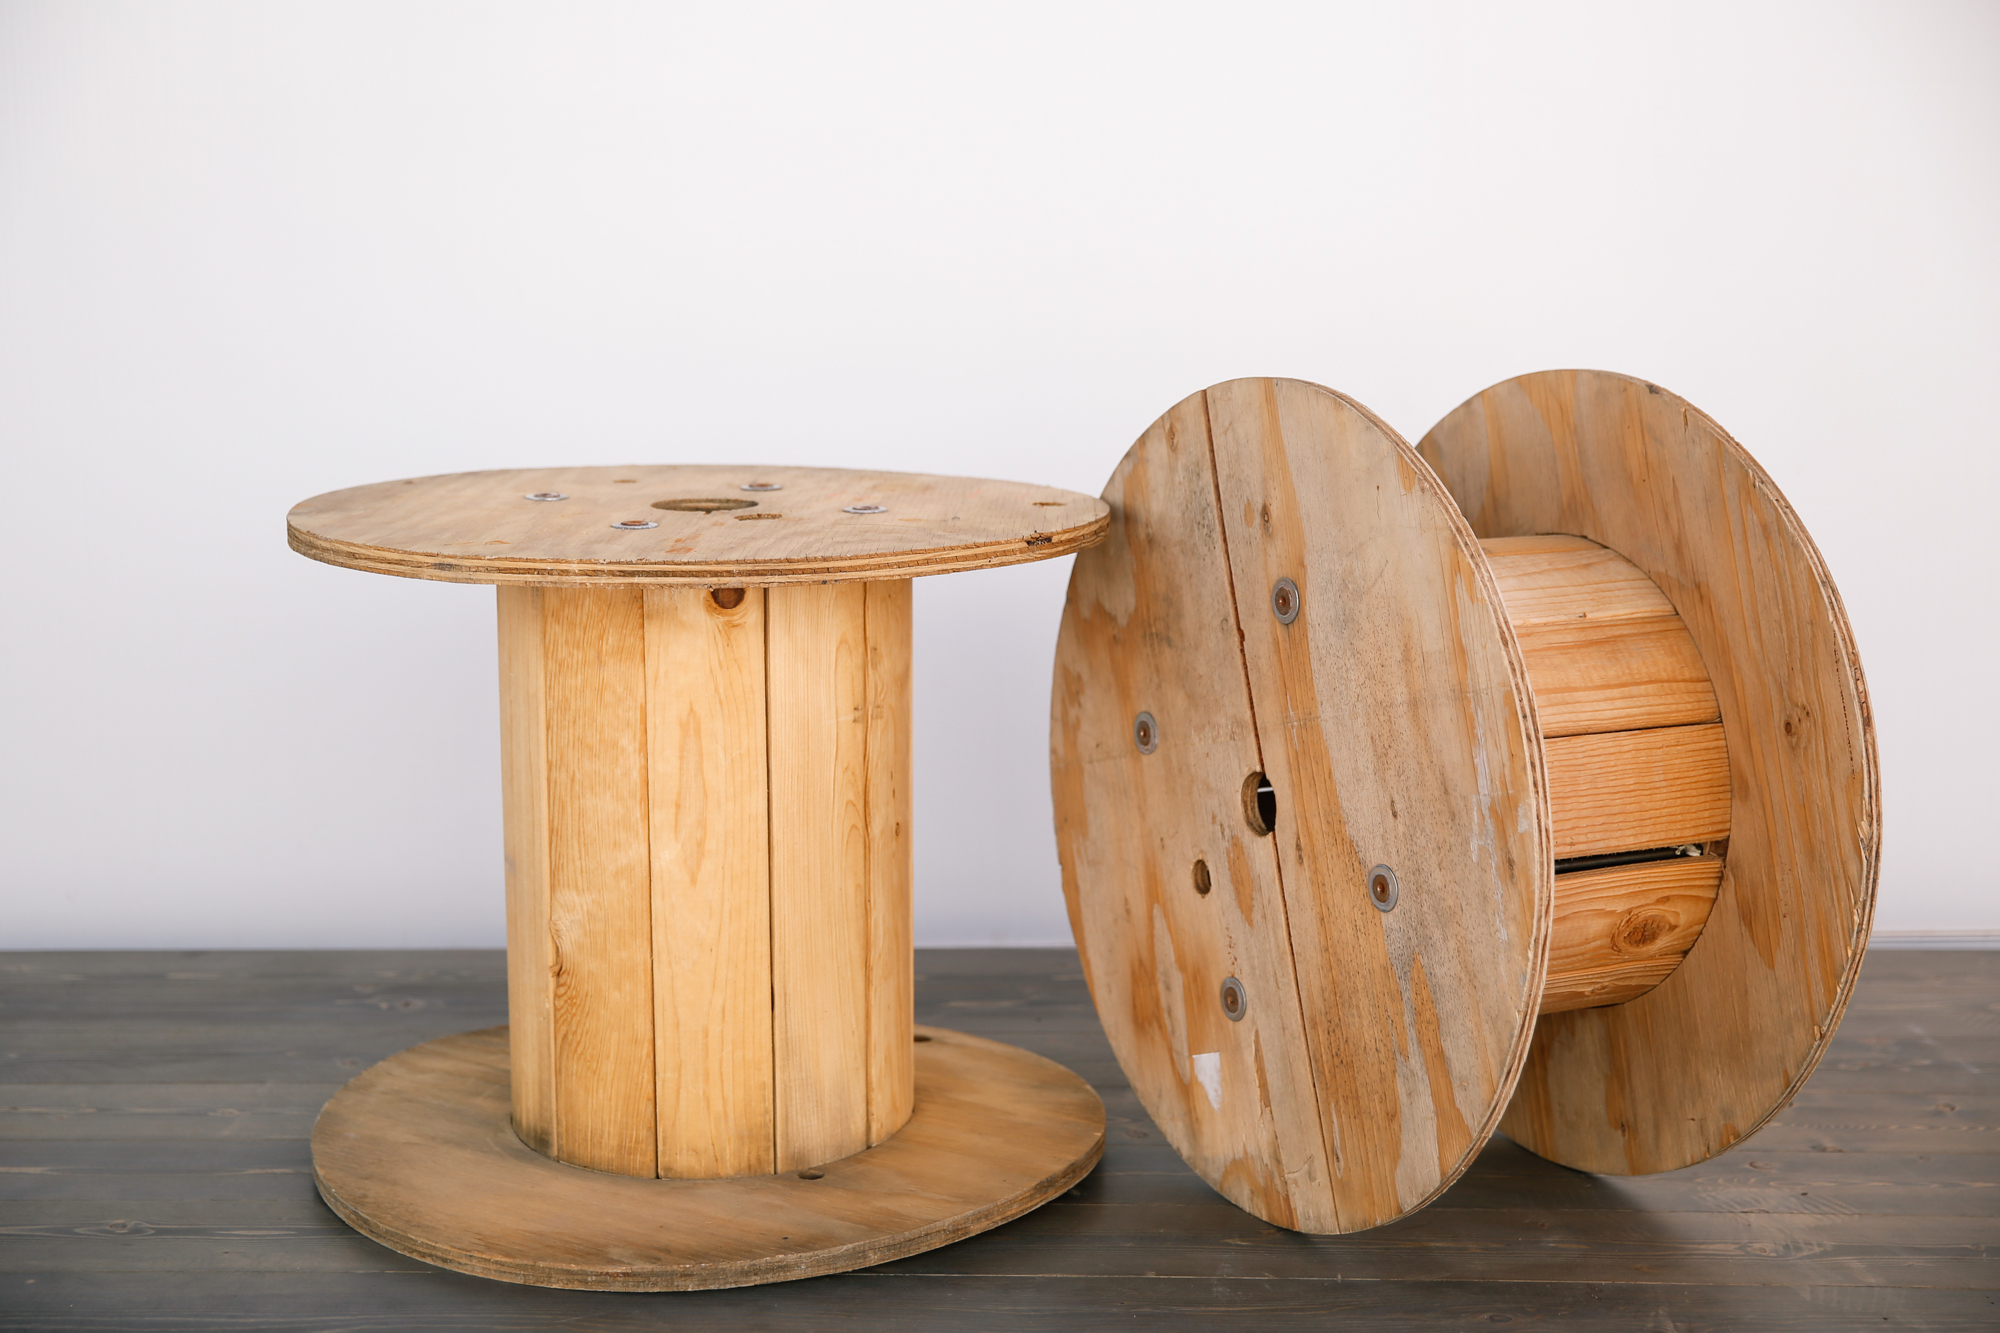 Wooden Spools Used To Hold Cables Rolls a Huge Wooden Spool of Wire Stock  Image - Image of curve, floor: 283191091